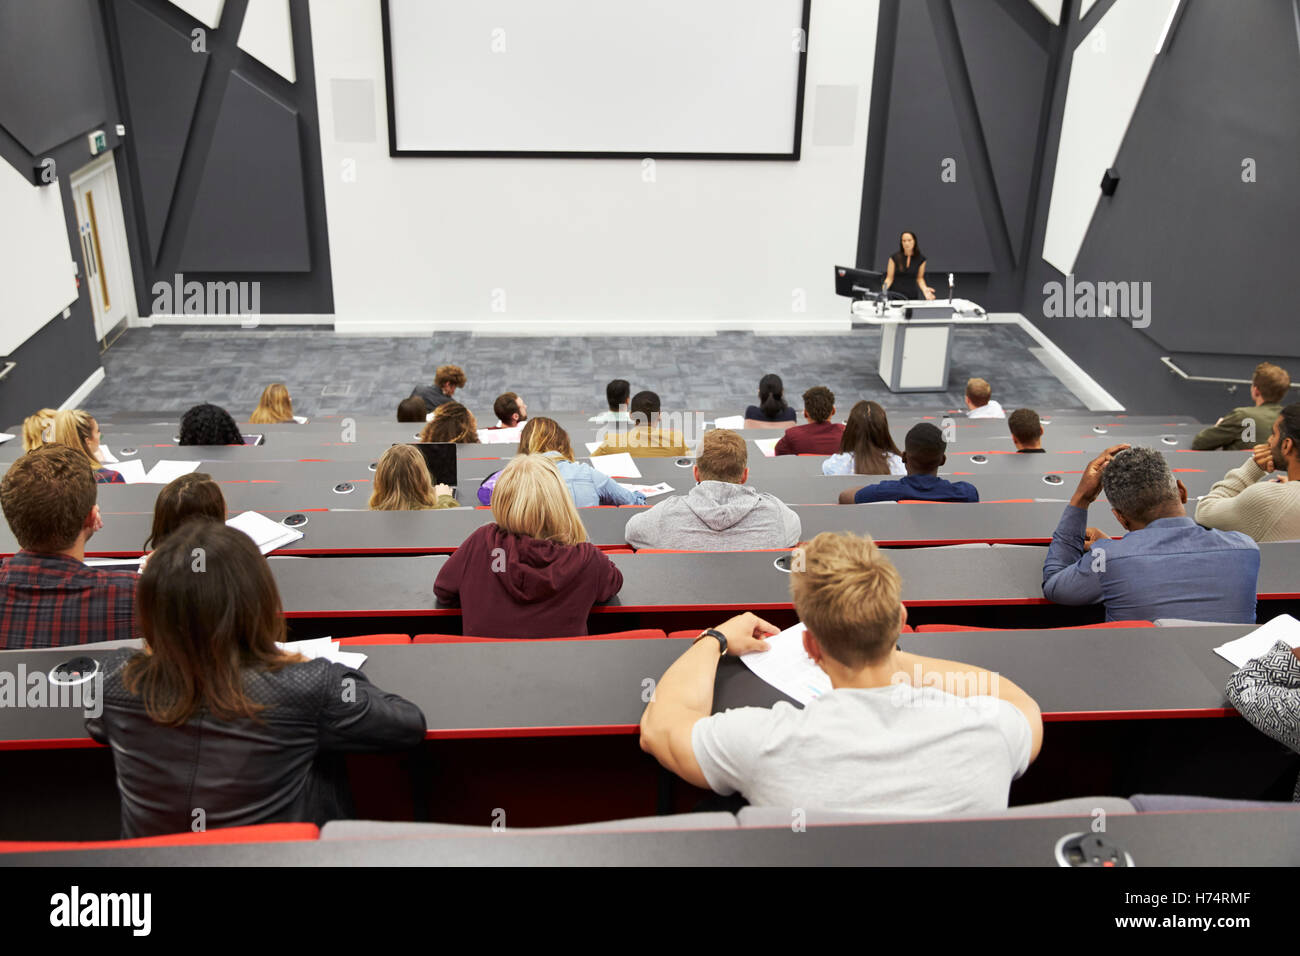 Lecture at university lecture theatre, audience POV Stock Photo